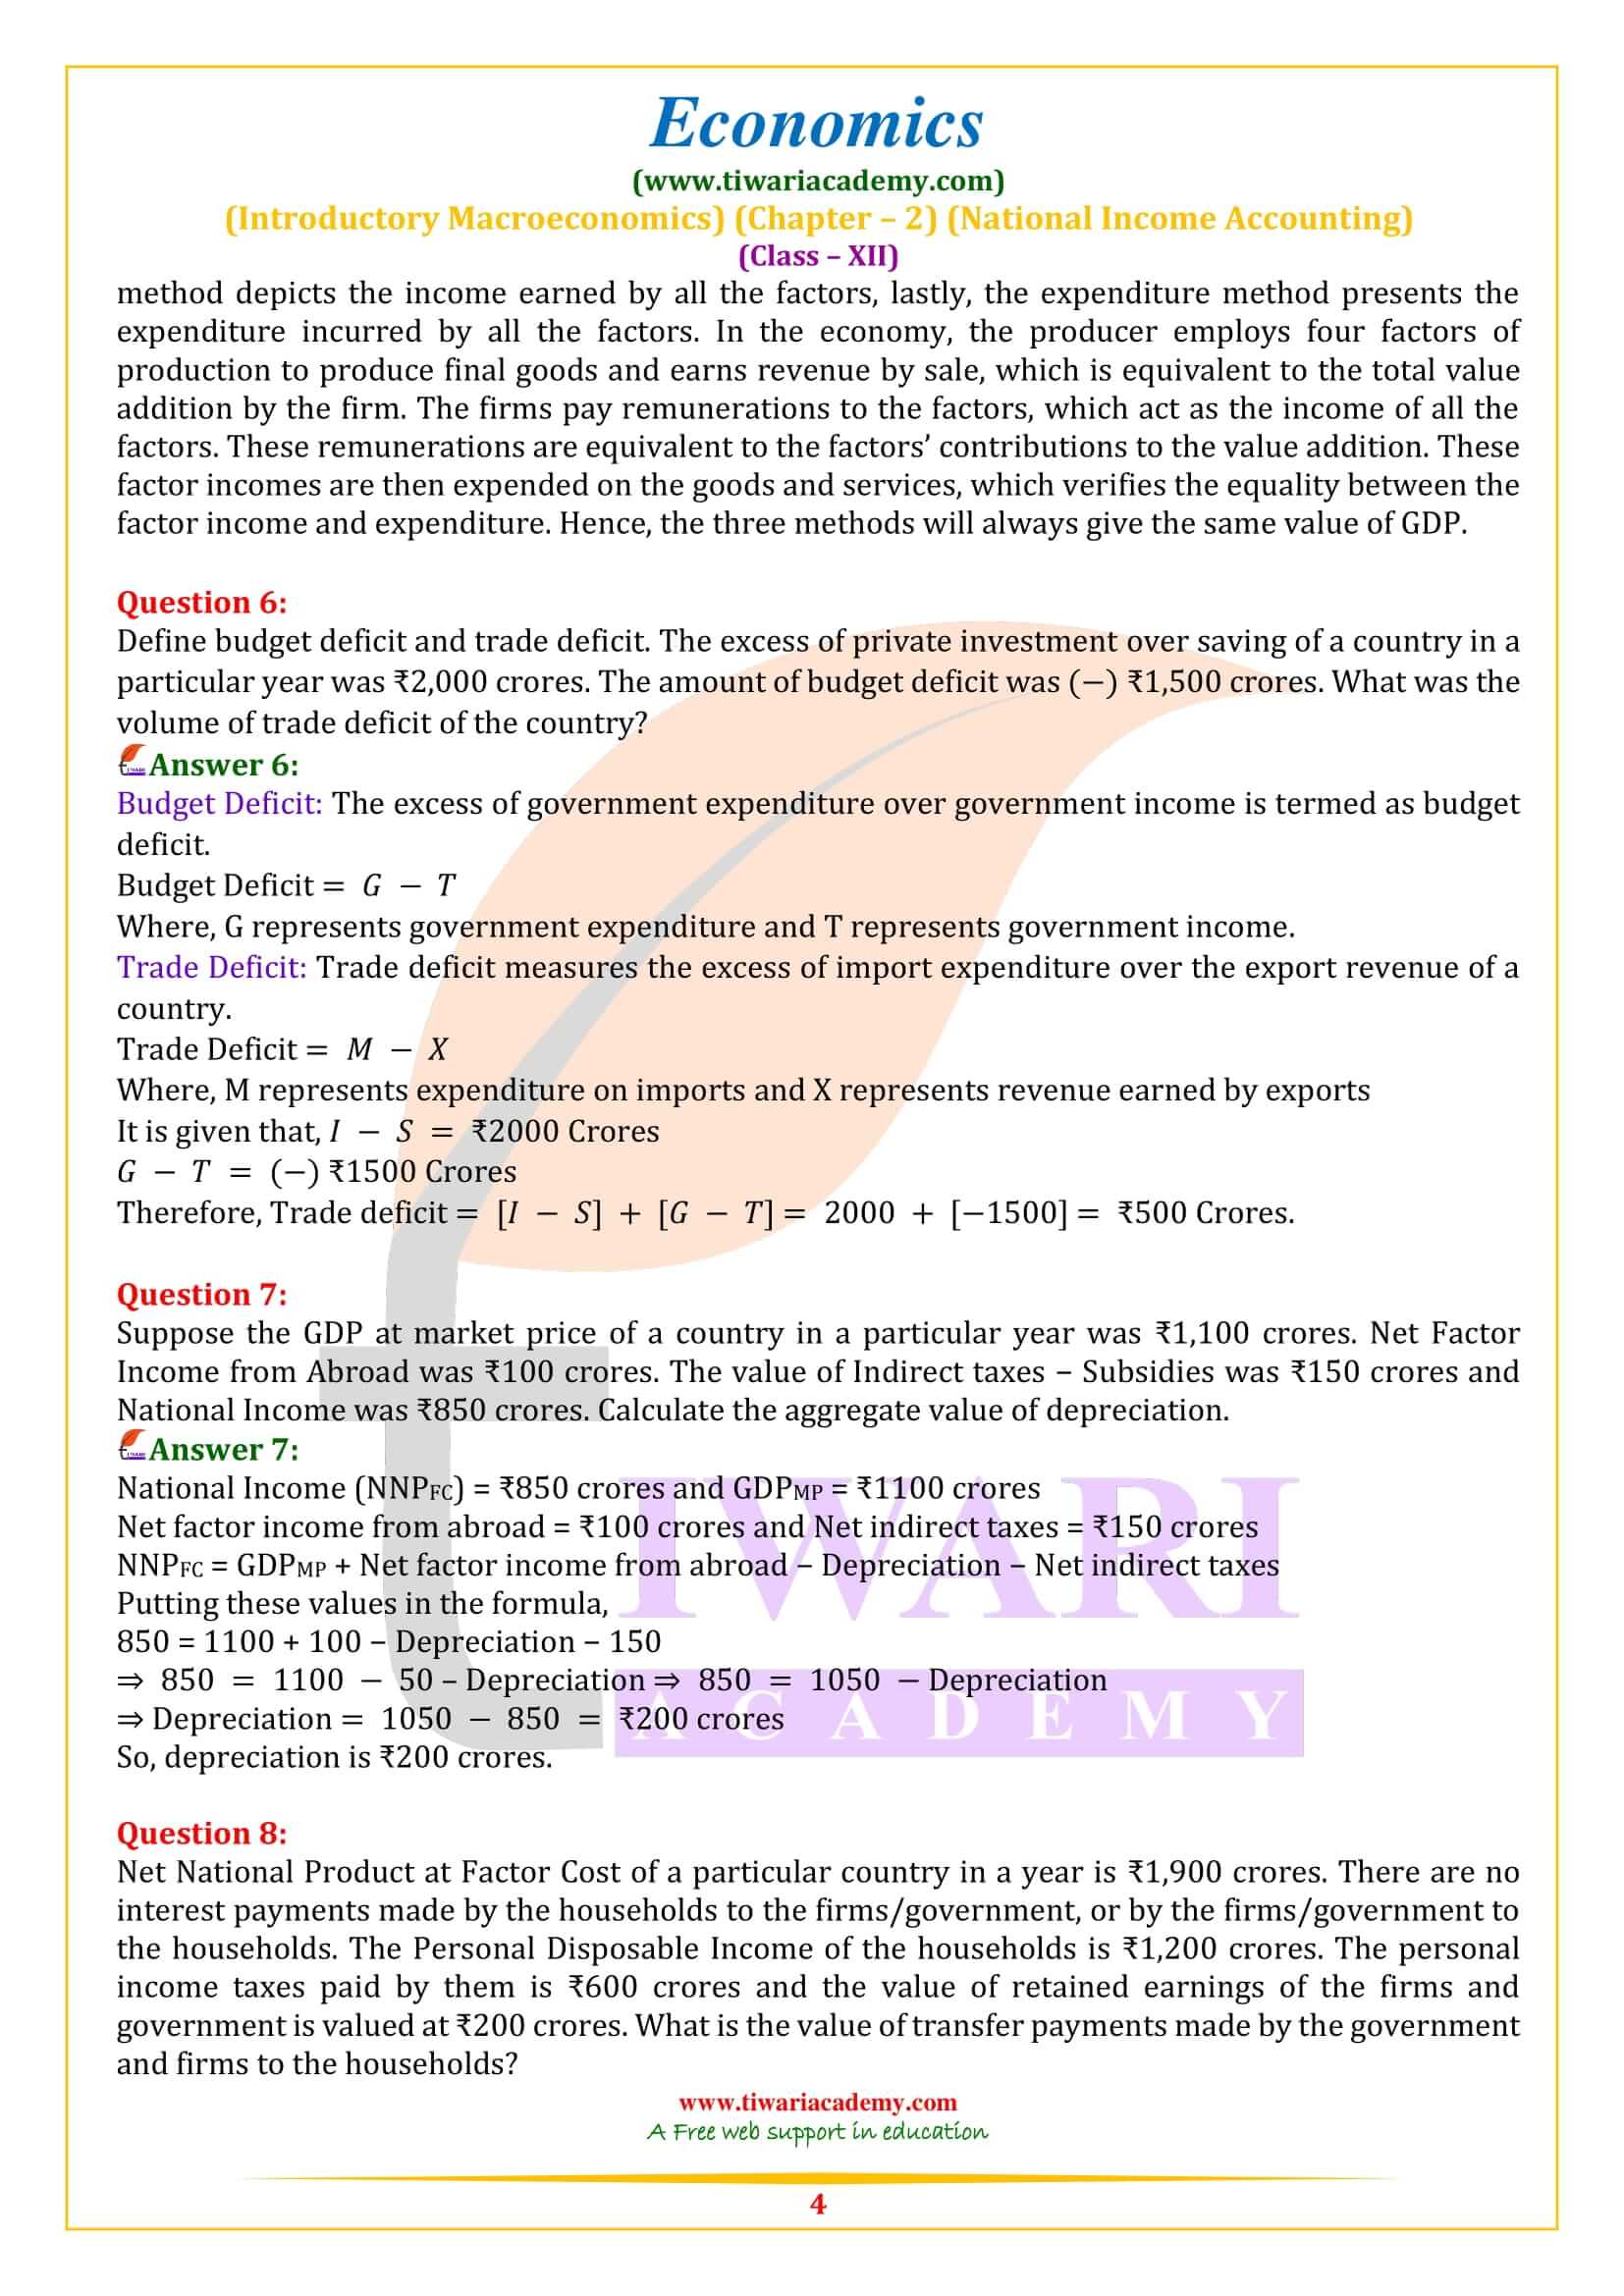 NCERT Solutions for Class 12 Economics Chapter 2